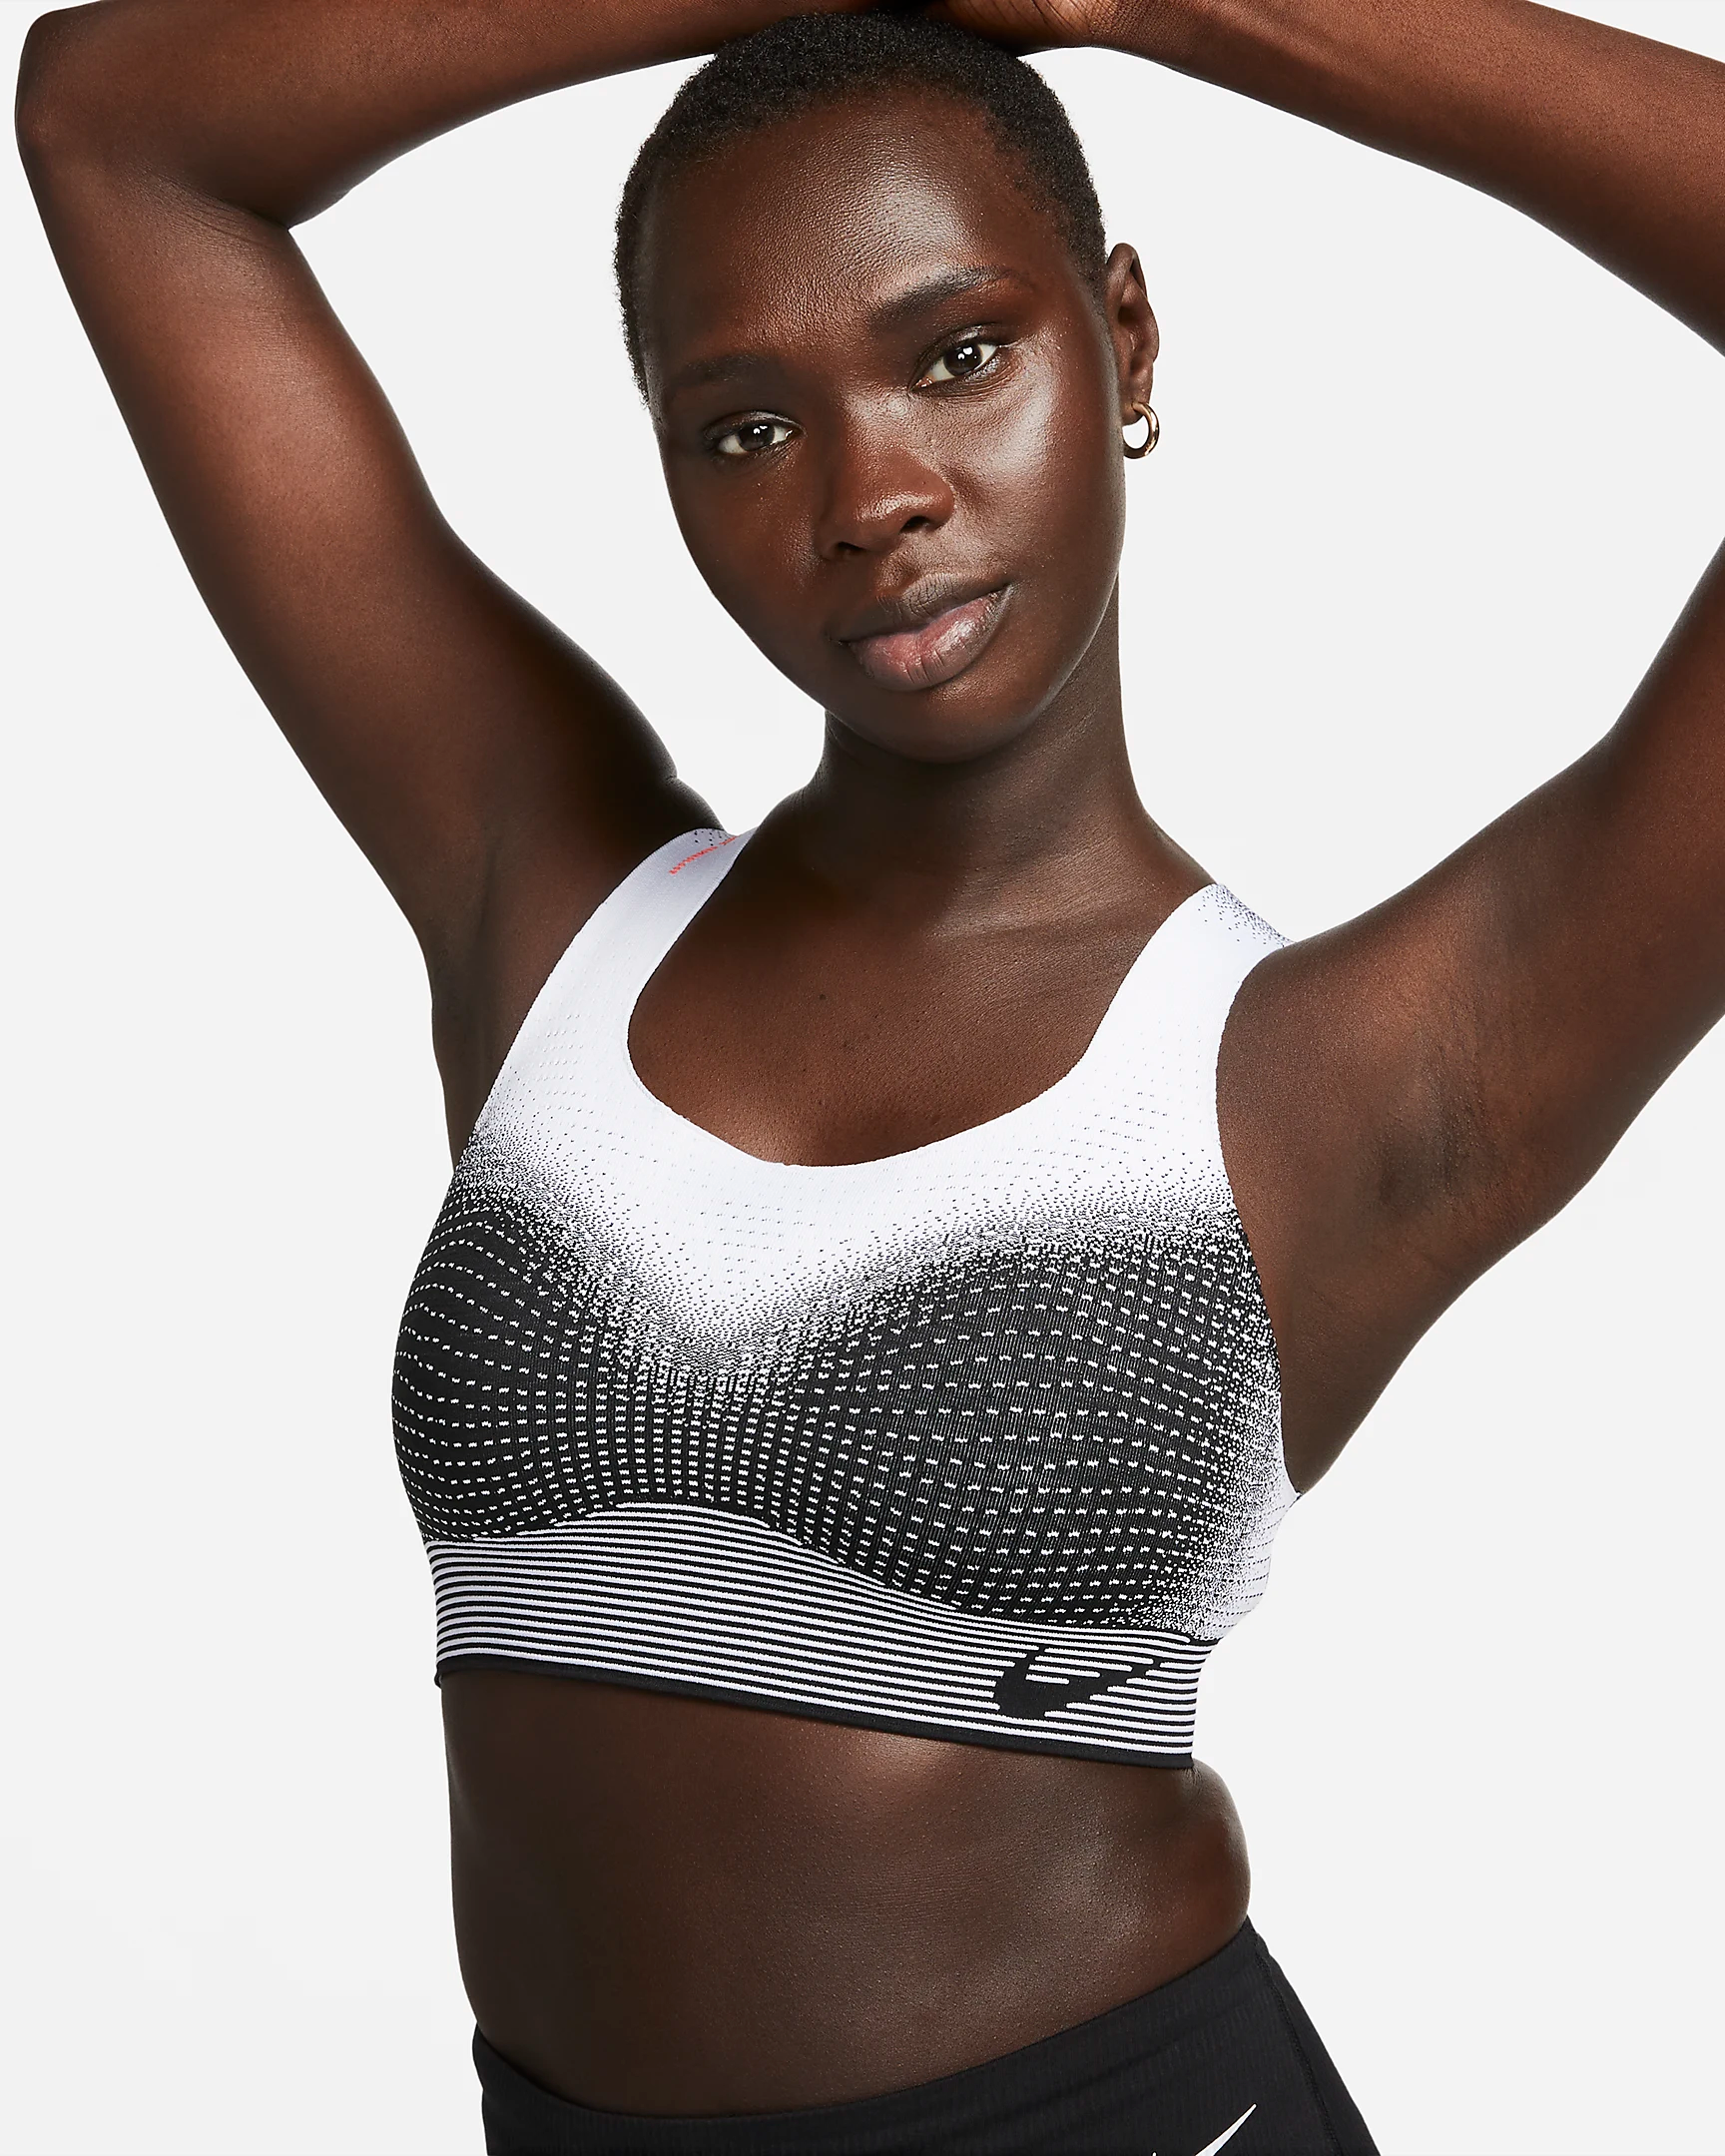 The Best Nike High-Support Sports Bras To Try. Nike MY